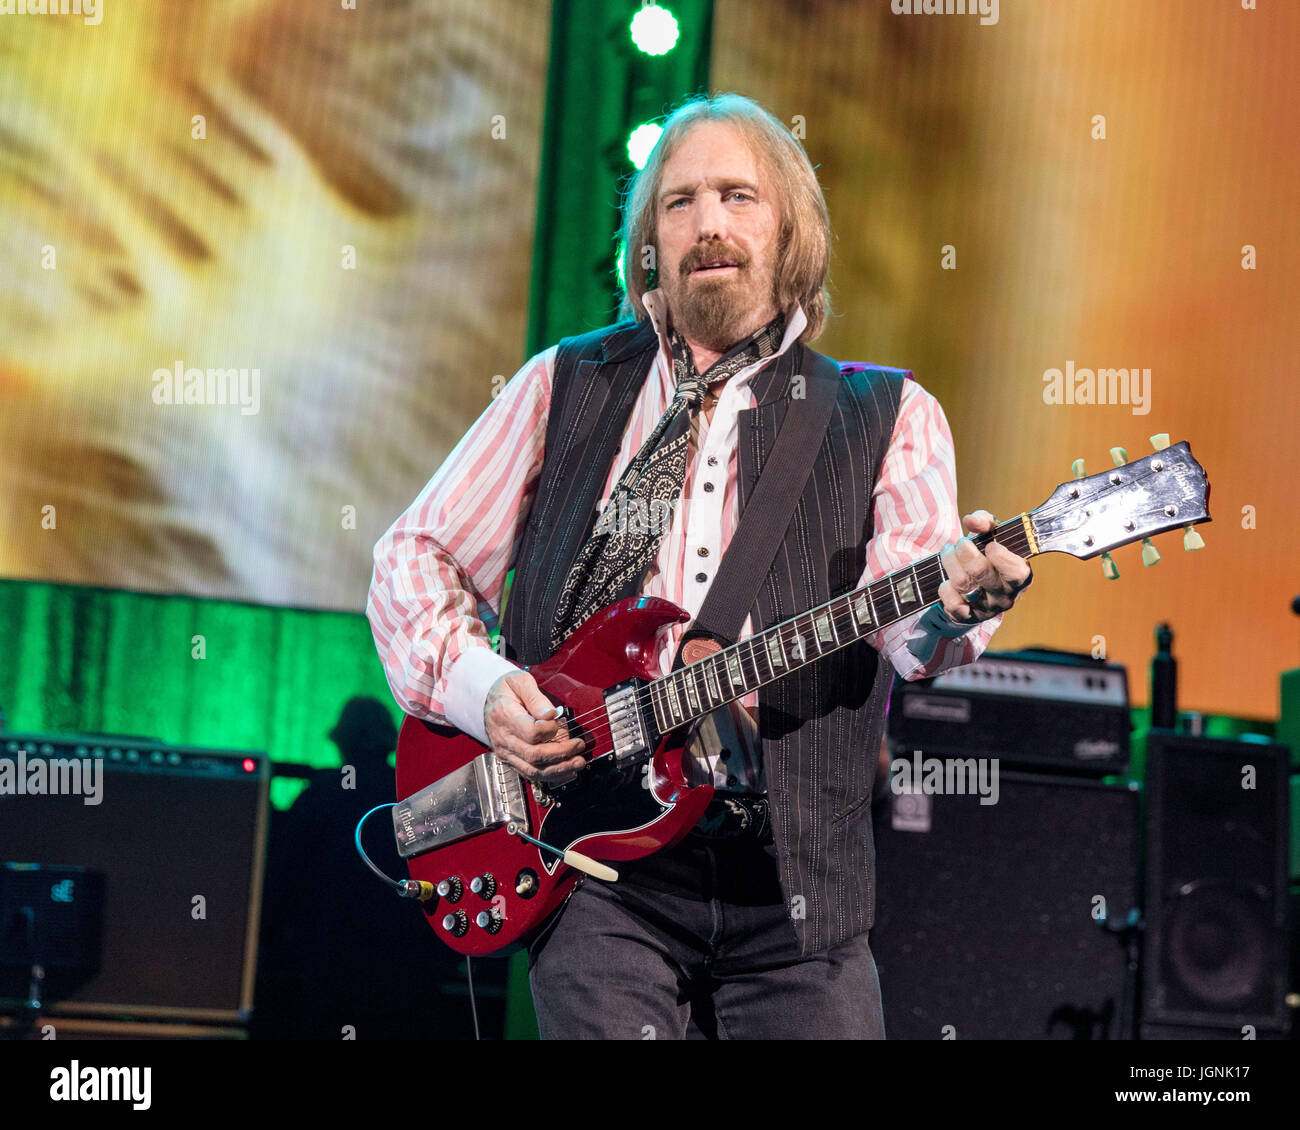 Milwaukee, Wisconsin, USA. 6th July, 2017. TOM PETTY of Tom Petty and the Heartbreakers performs live at Henry Maier Festival Park during Summerfest in Milwaukee, Wisconsin Credit: Daniel DeSlover/ZUMA Wire/Alamy Live News Stock Photo